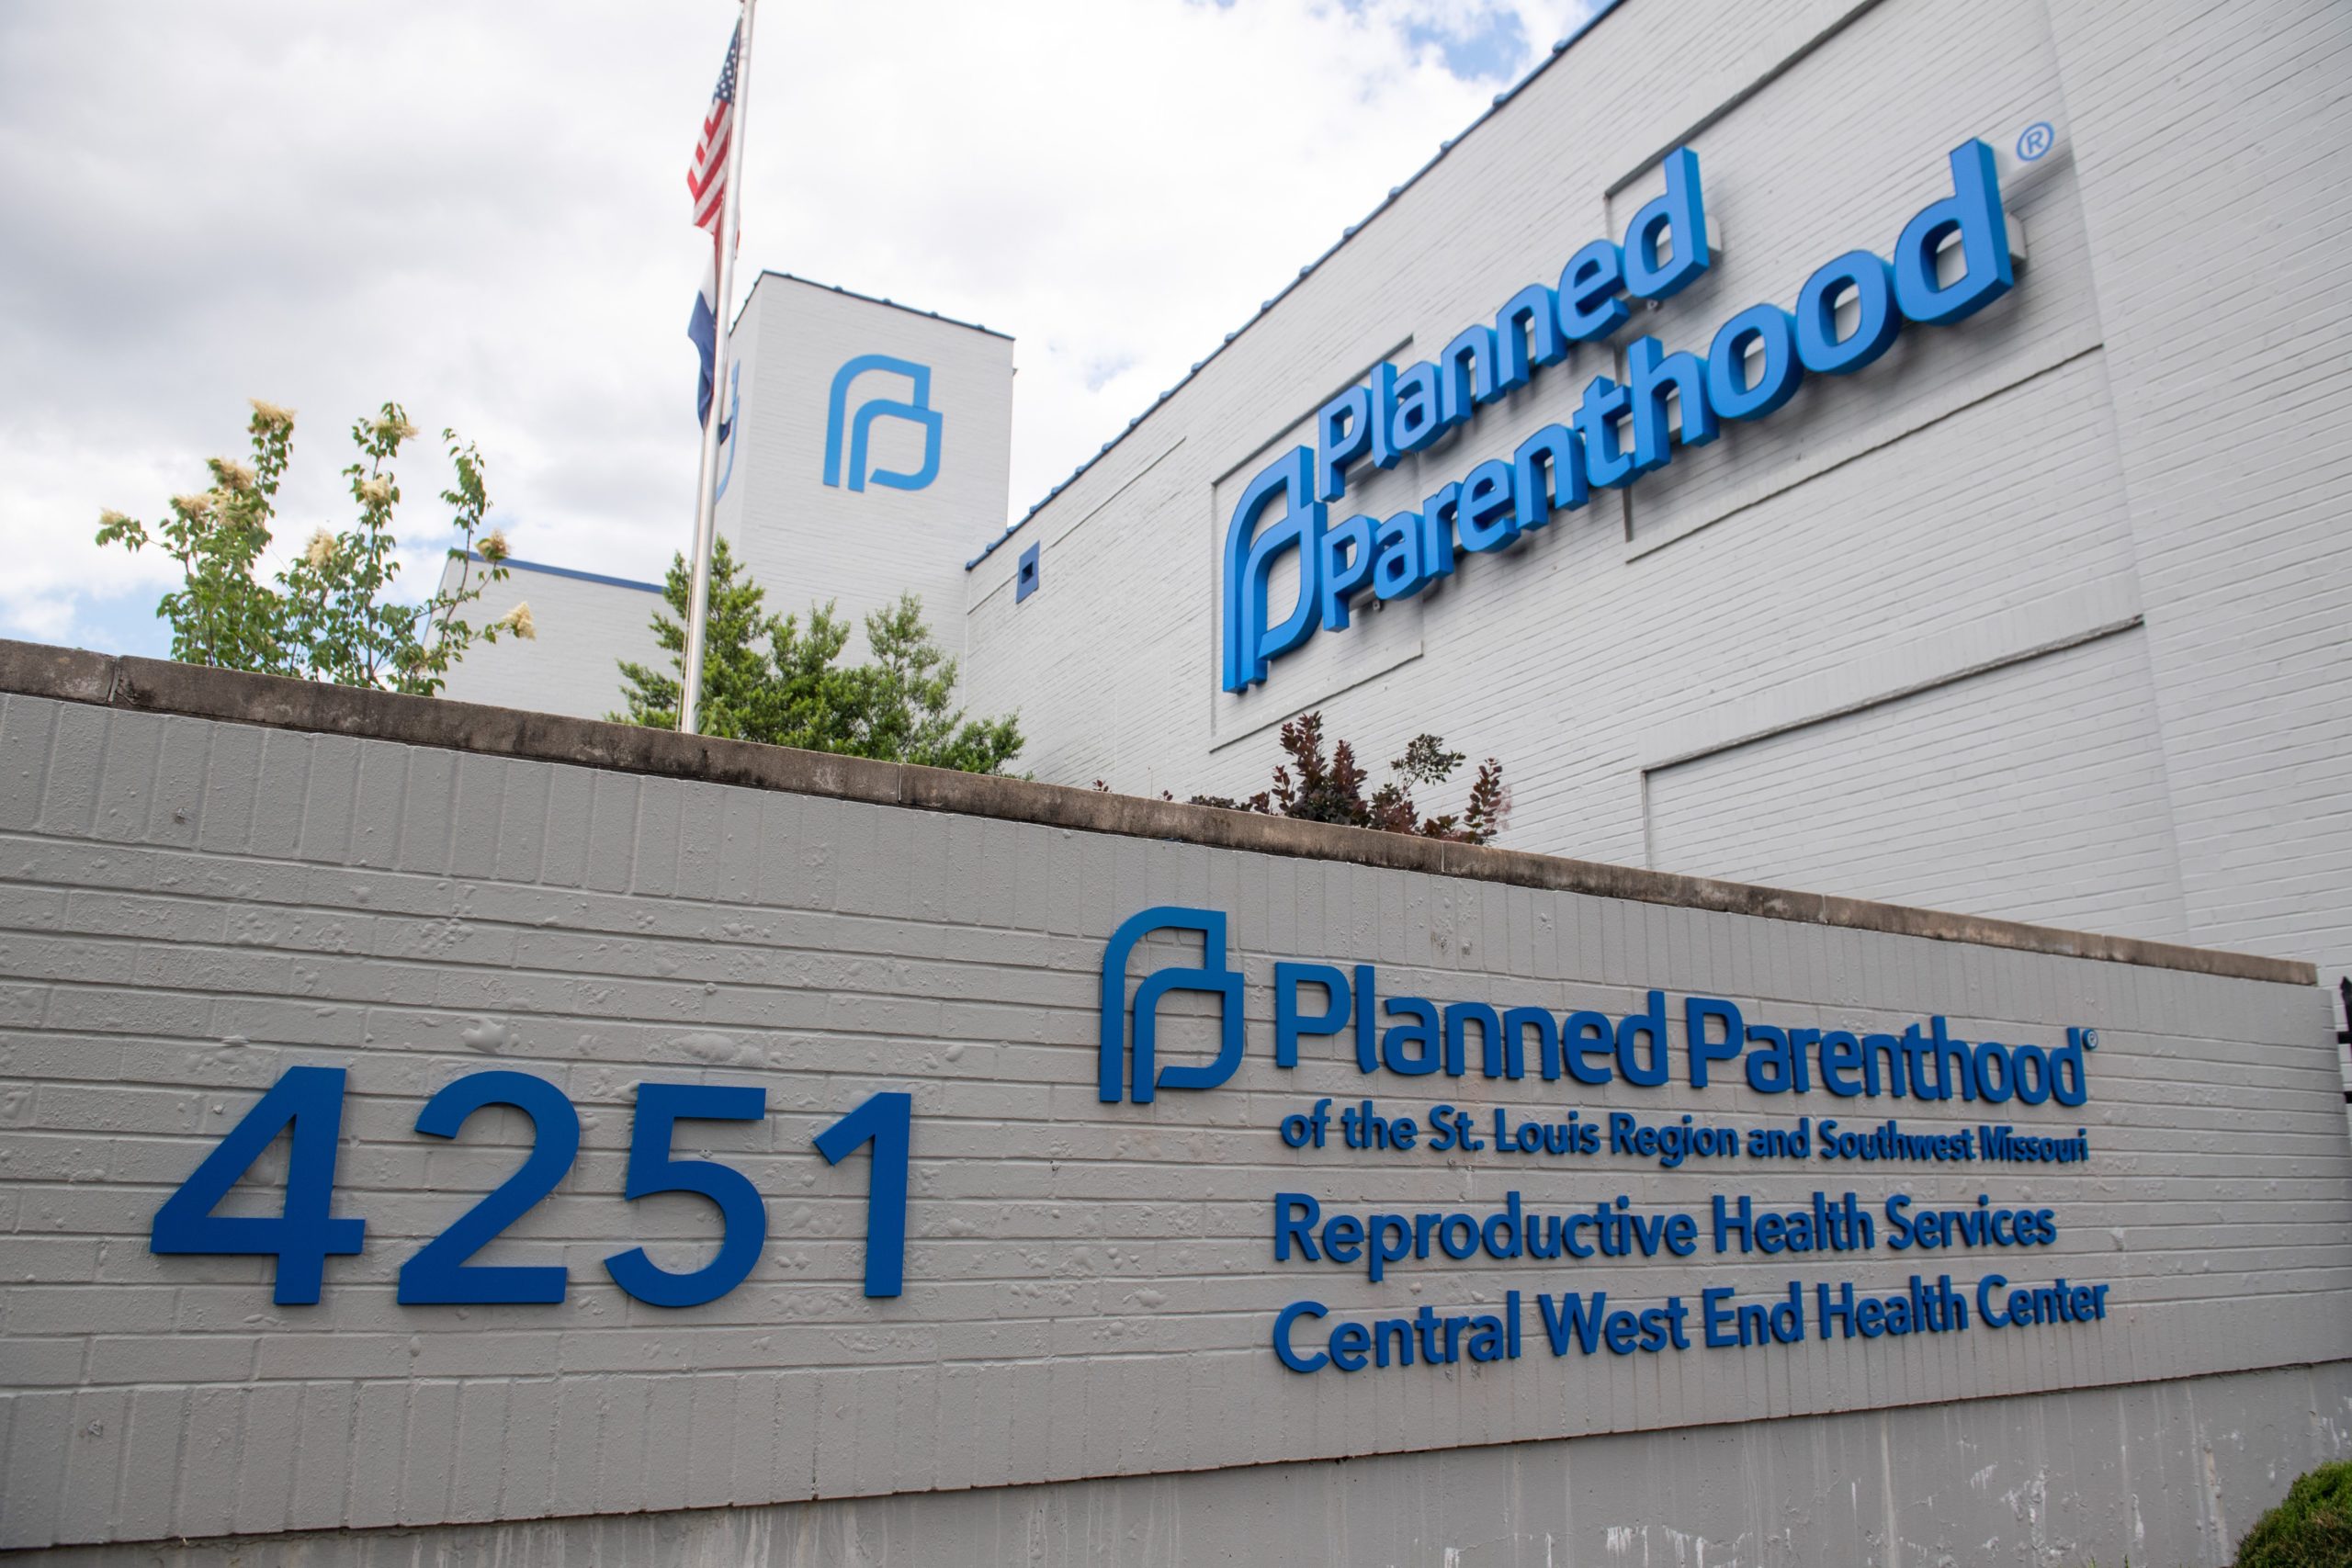 The outside of the Planned Parenthood Reproductive Health Services Center is seen in St. Louis, Missouri, May 30, 2019, the last location in the state performing abortions. - A US court weighed the fate of the last abortion clinic in Missouri on May 30, with the state hours away from becoming the first in 45 years to no longer offer the procedure amid a nationwide push to curtail access to abortion. (Photo by SAUL LOEB / AFP) (Photo credit should read SAUL LOEB/AFP via Getty Images)